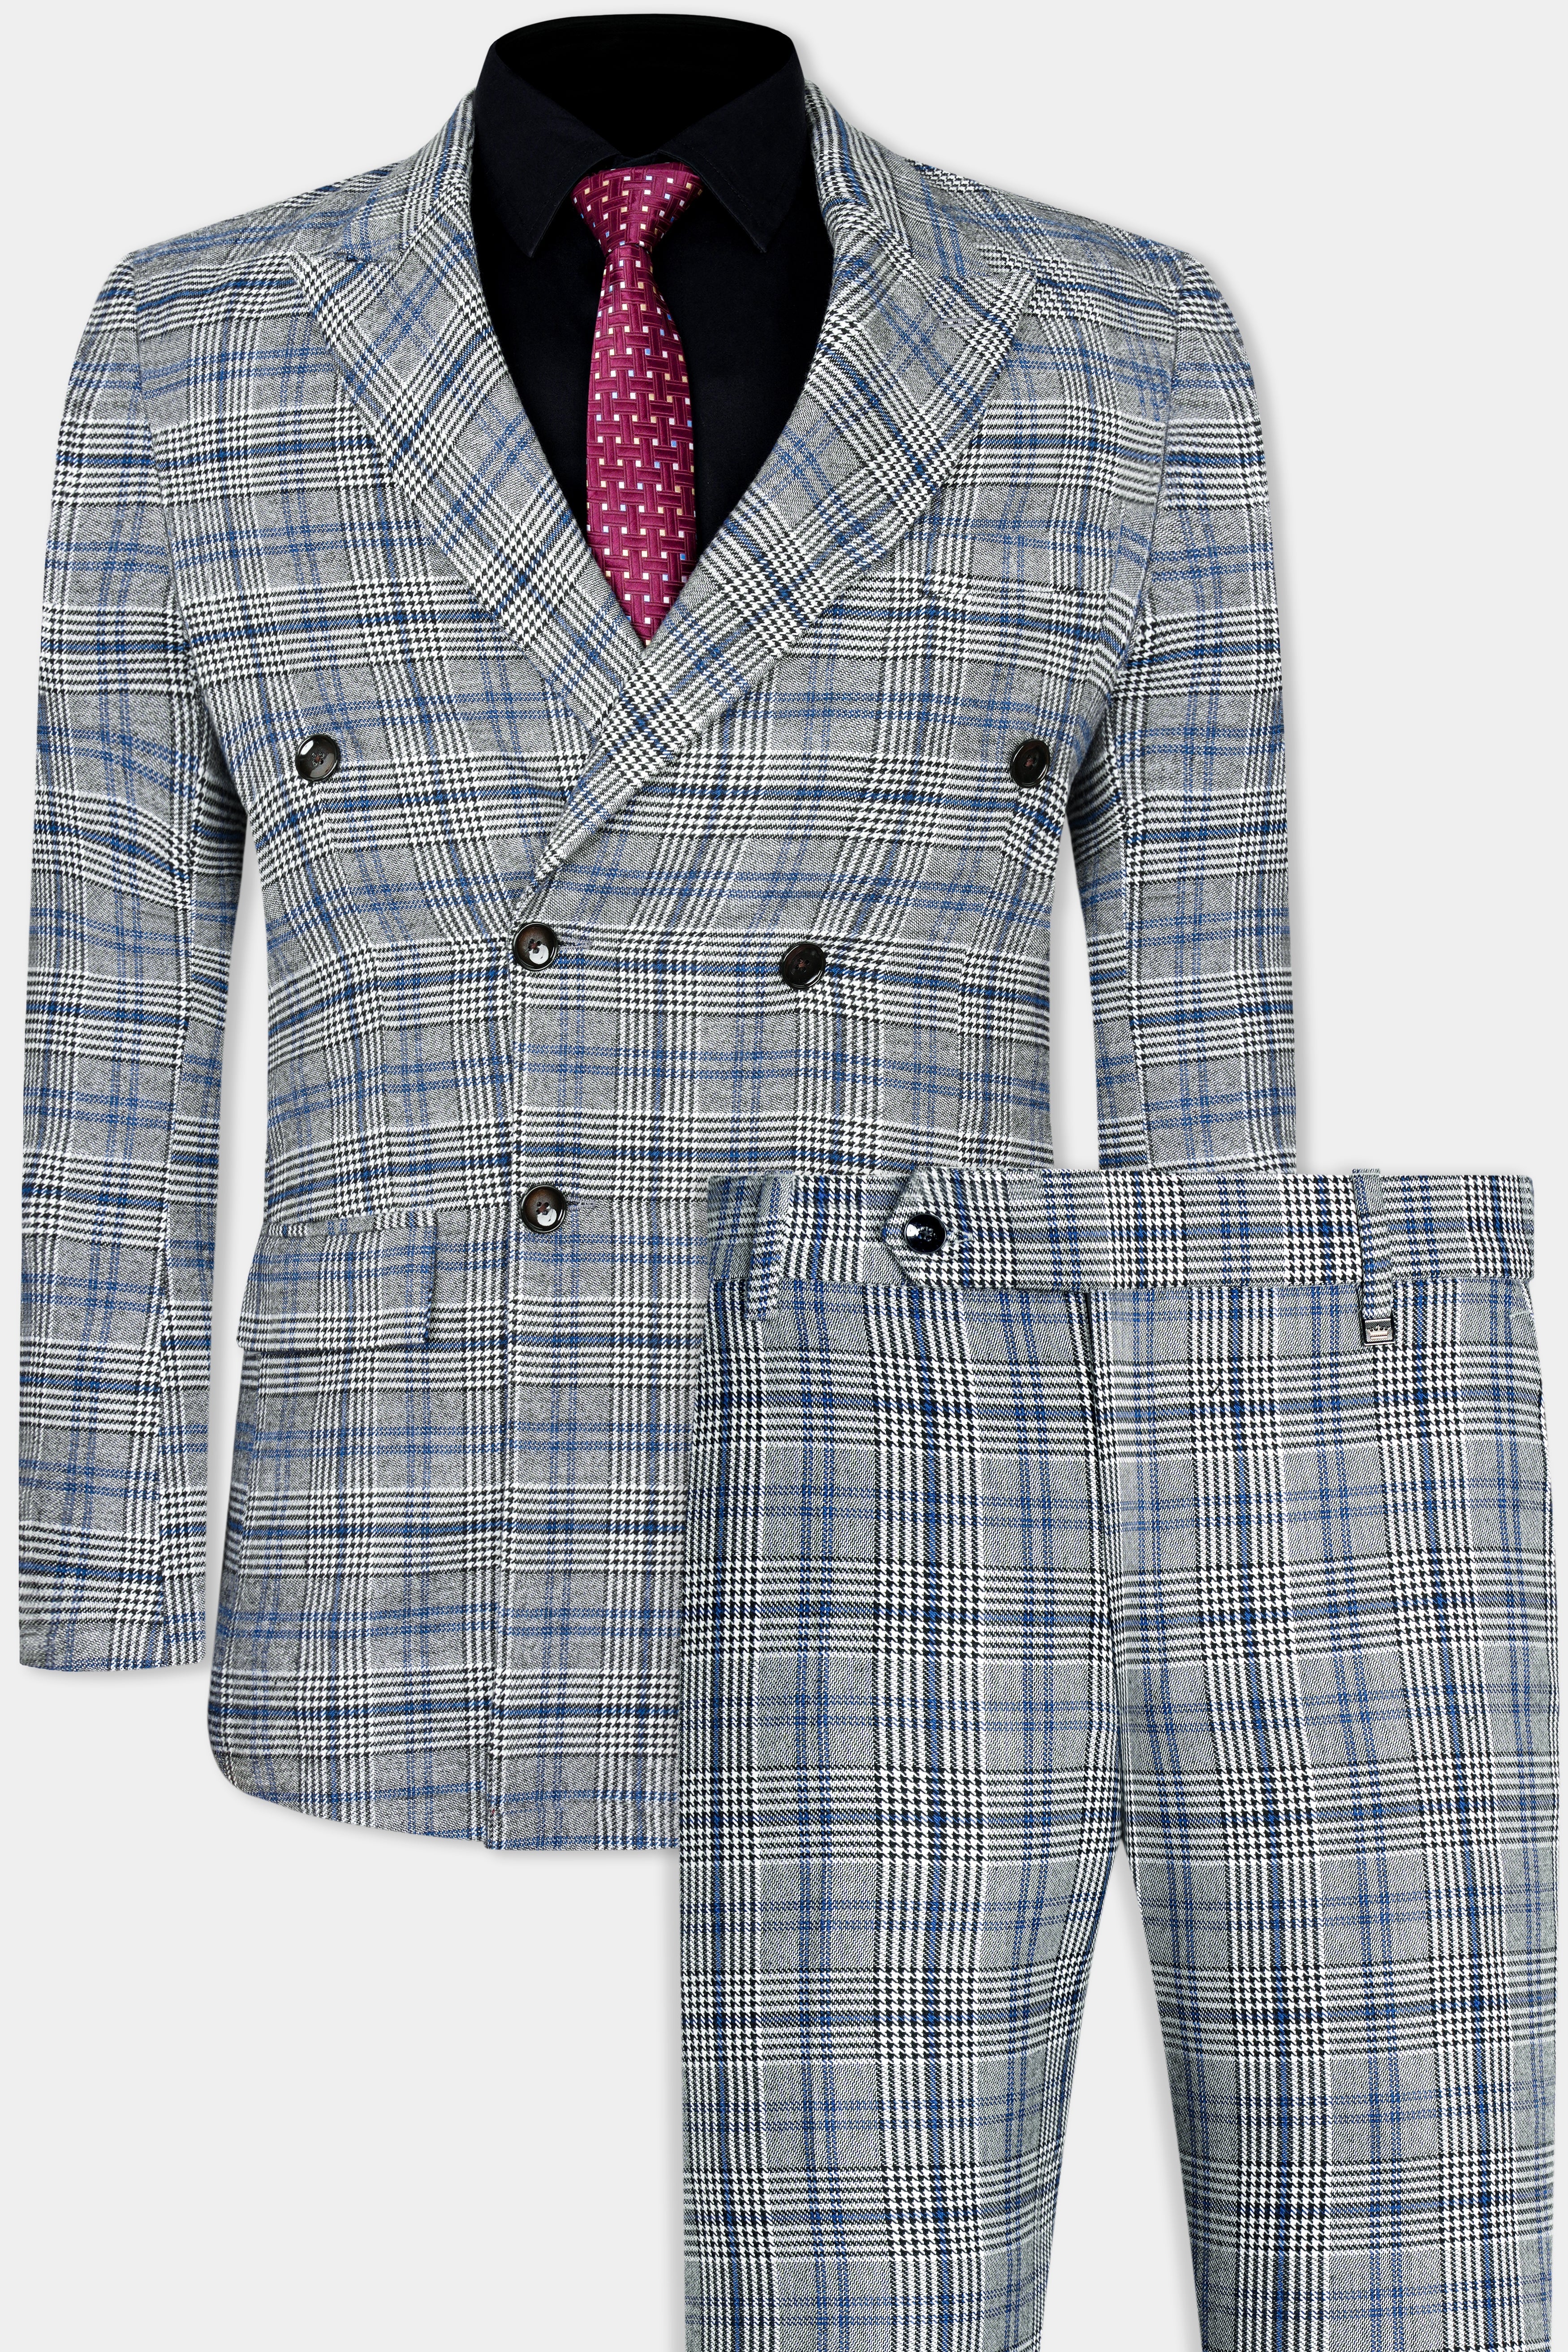 Chalice Gray and Chathams Blue Plaid Houndstooth Tweed Double-Breasted Suit ST3027-DB-36, ST3027-DB-38, ST3027-DB-40, ST3027-DB-42, ST3027-DB-44, ST3027-DB-46, ST3027-DB-48, ST3027-DB-50, ST3027-DB-52, ST3027-DB-54, ST3027-DB-56, ST3027-DB-58, ST3027-DB-60